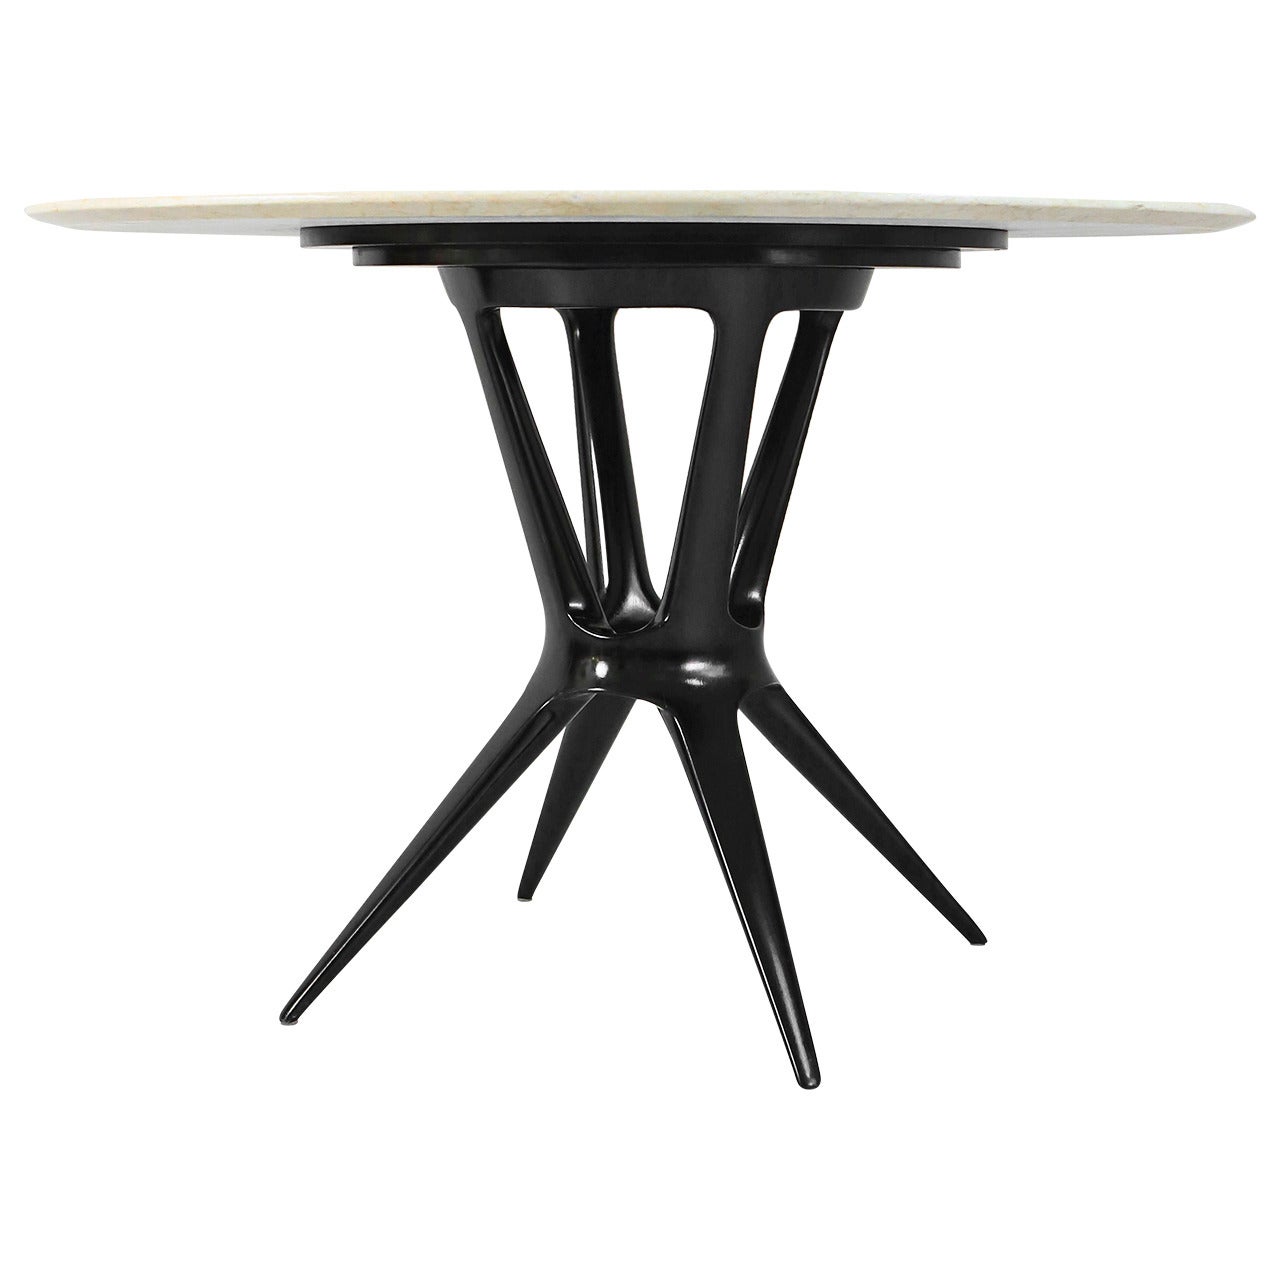 Slender and Important, Italian 1950s Round Dining or Center Table by Borsani